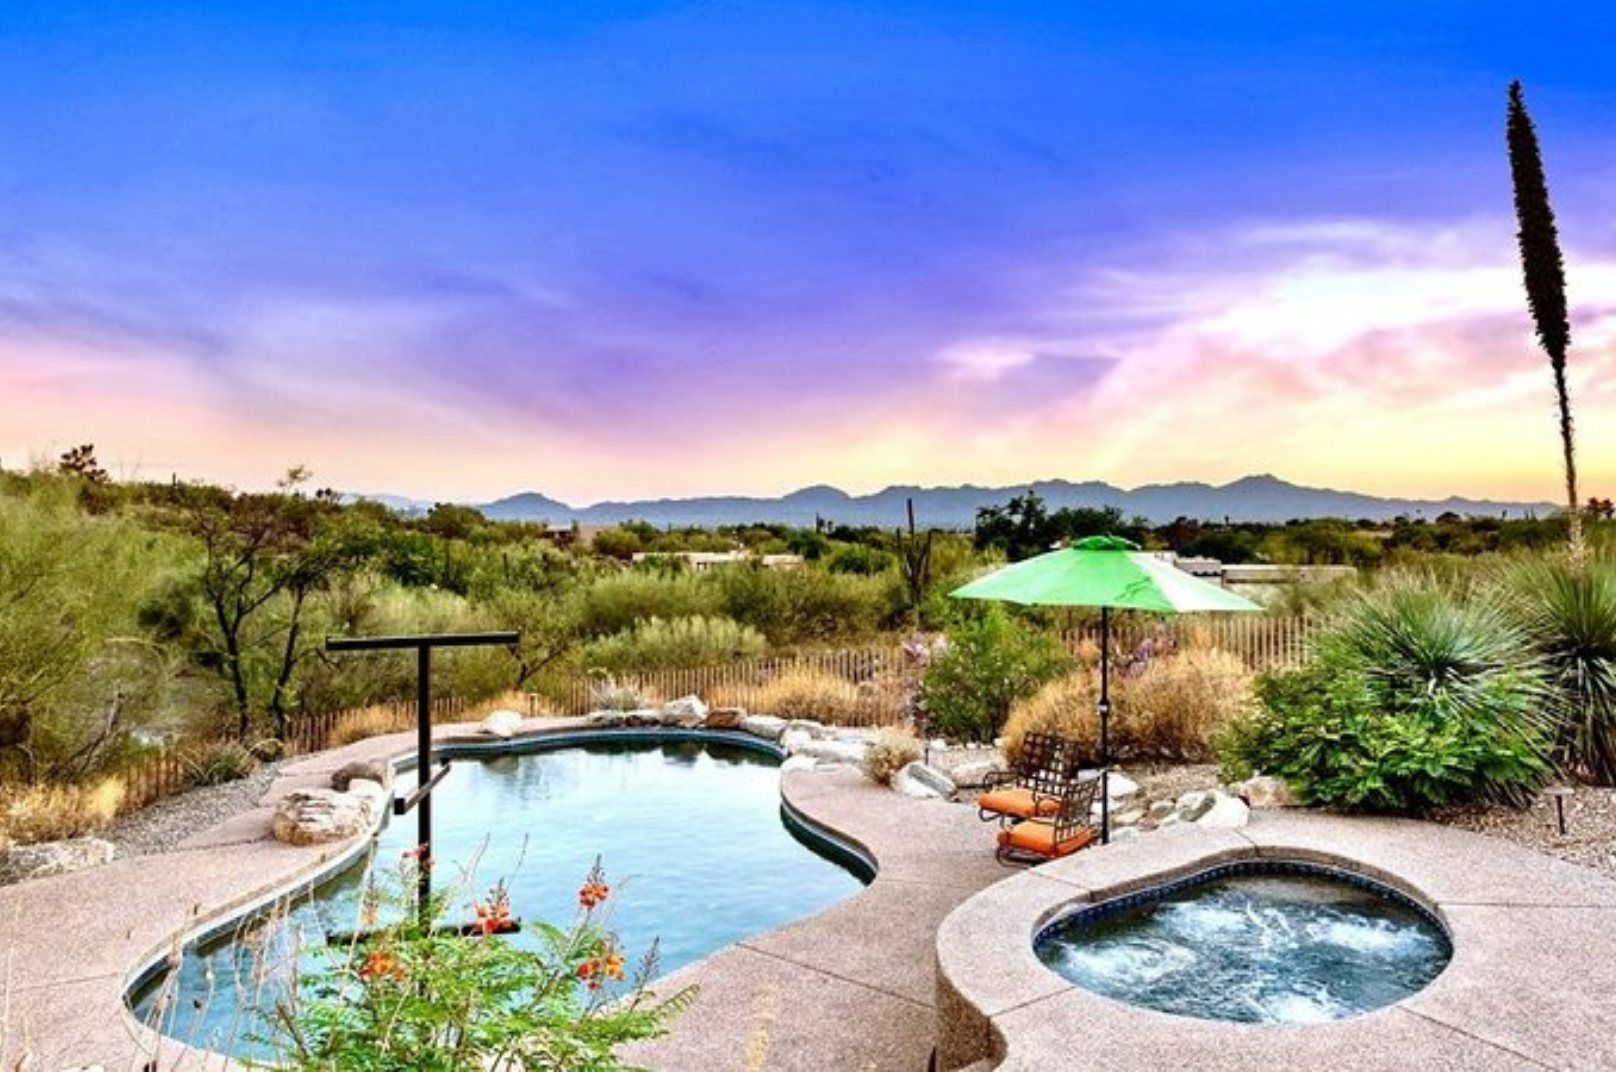 Vacation homes in the Southwest